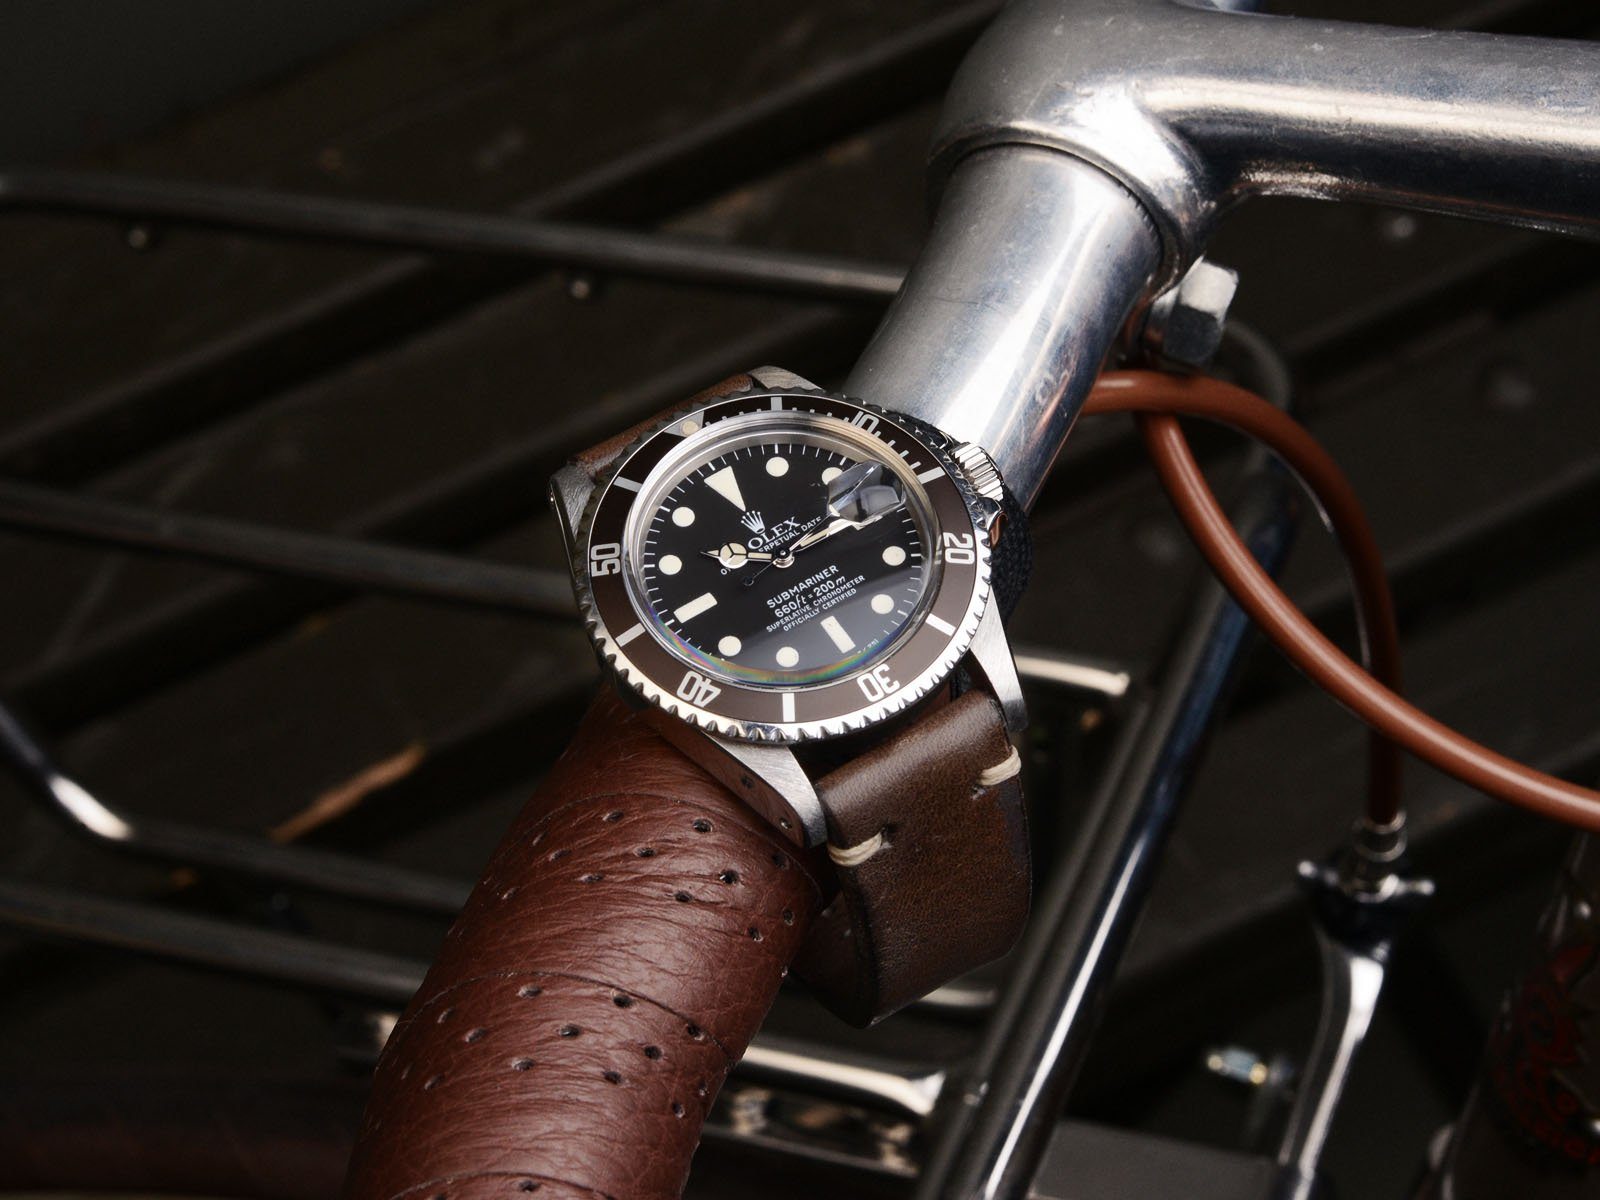 CURATED ‘URBAN RIDER’ ROLEX 1680 SUBMARINER AND BIKE